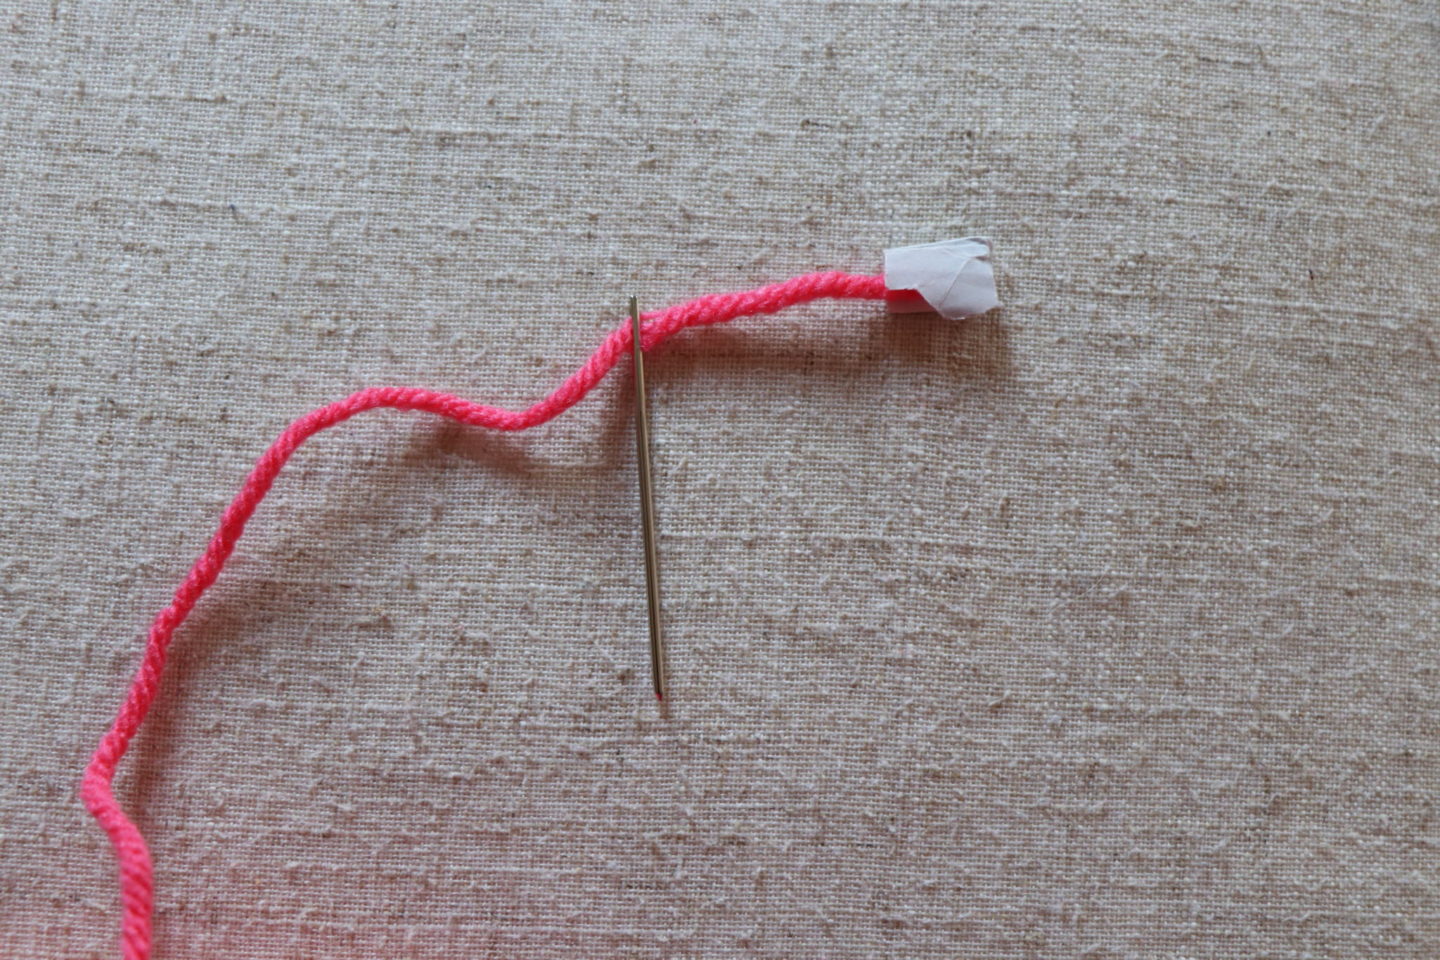 How to weave in ends. THE BEST TIP: use paper to hold the yarn. Look how easy that is!